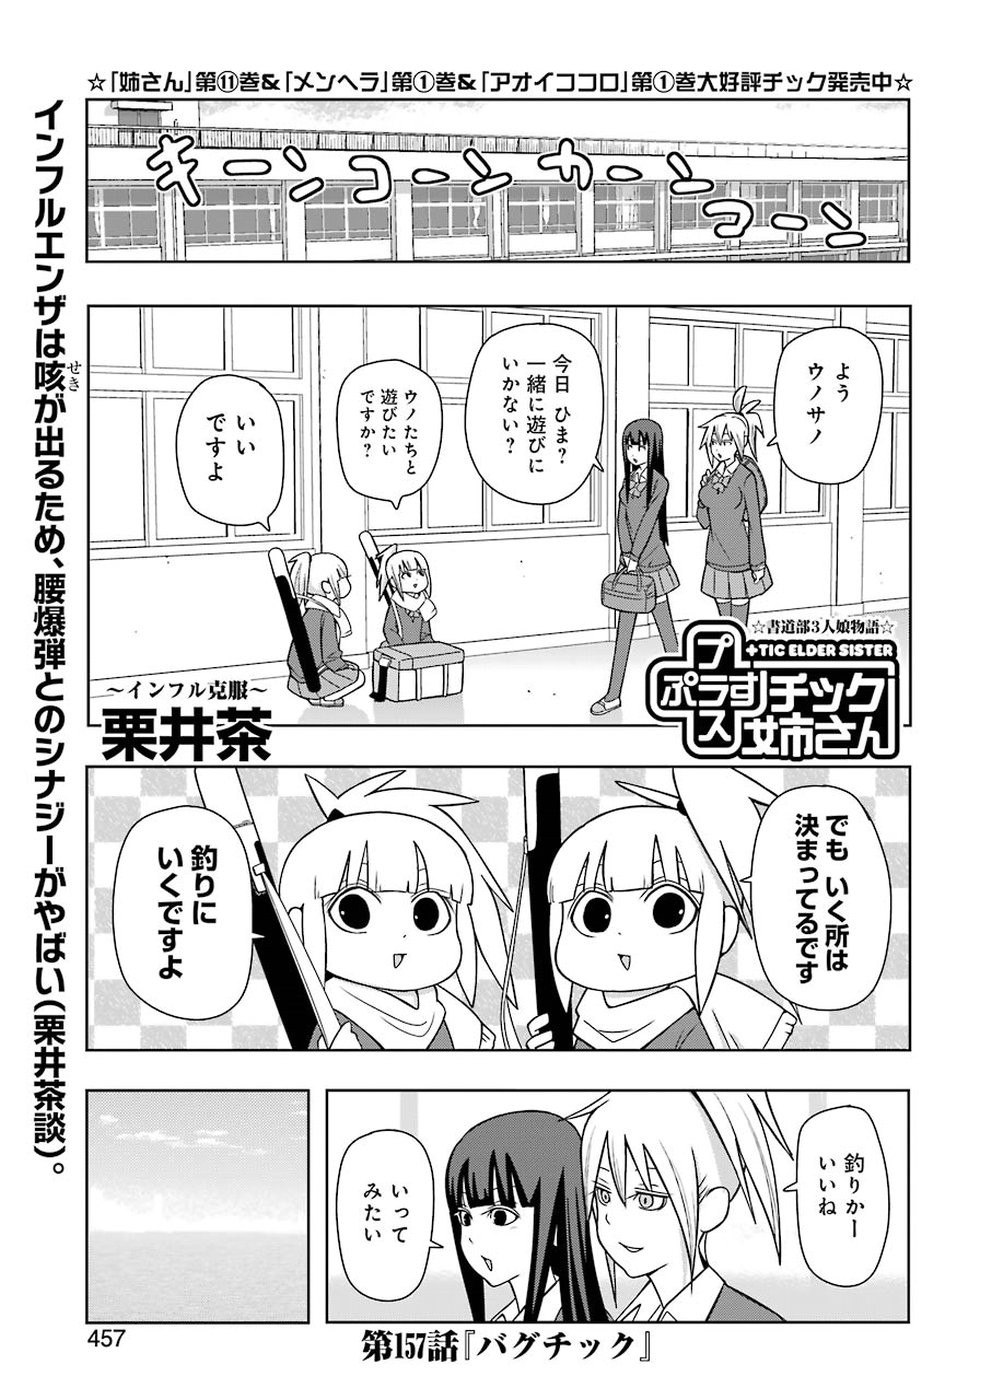 + Tic Nee-san - Chapter 157 - Page 1